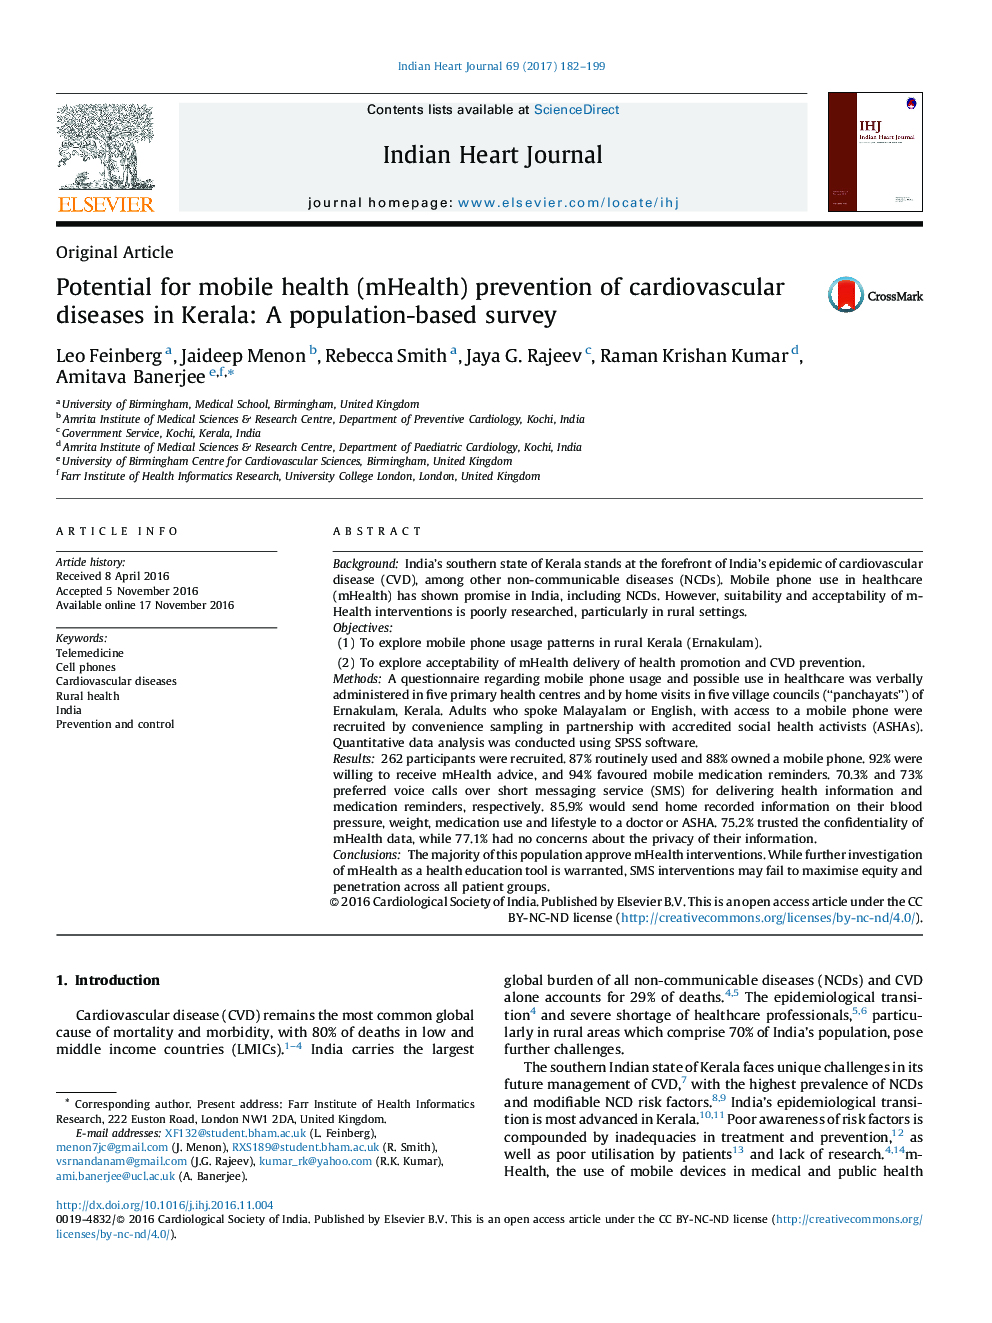 Potential for mobile health (mHealth) prevention of cardiovascular diseases in Kerala: A population-based survey